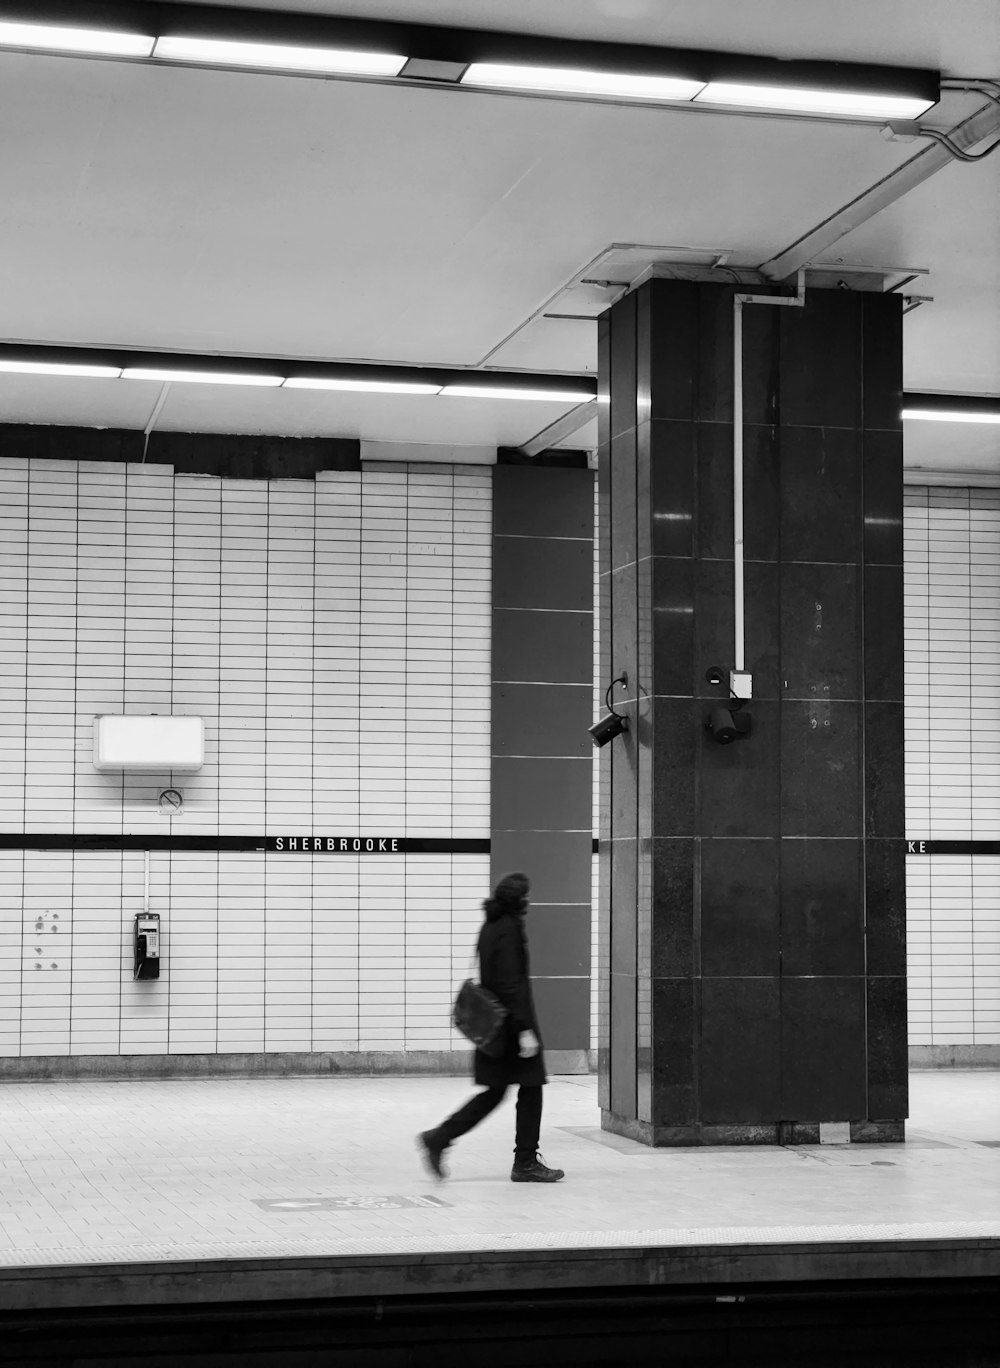 a black and white photo of a person walking on a subway platform